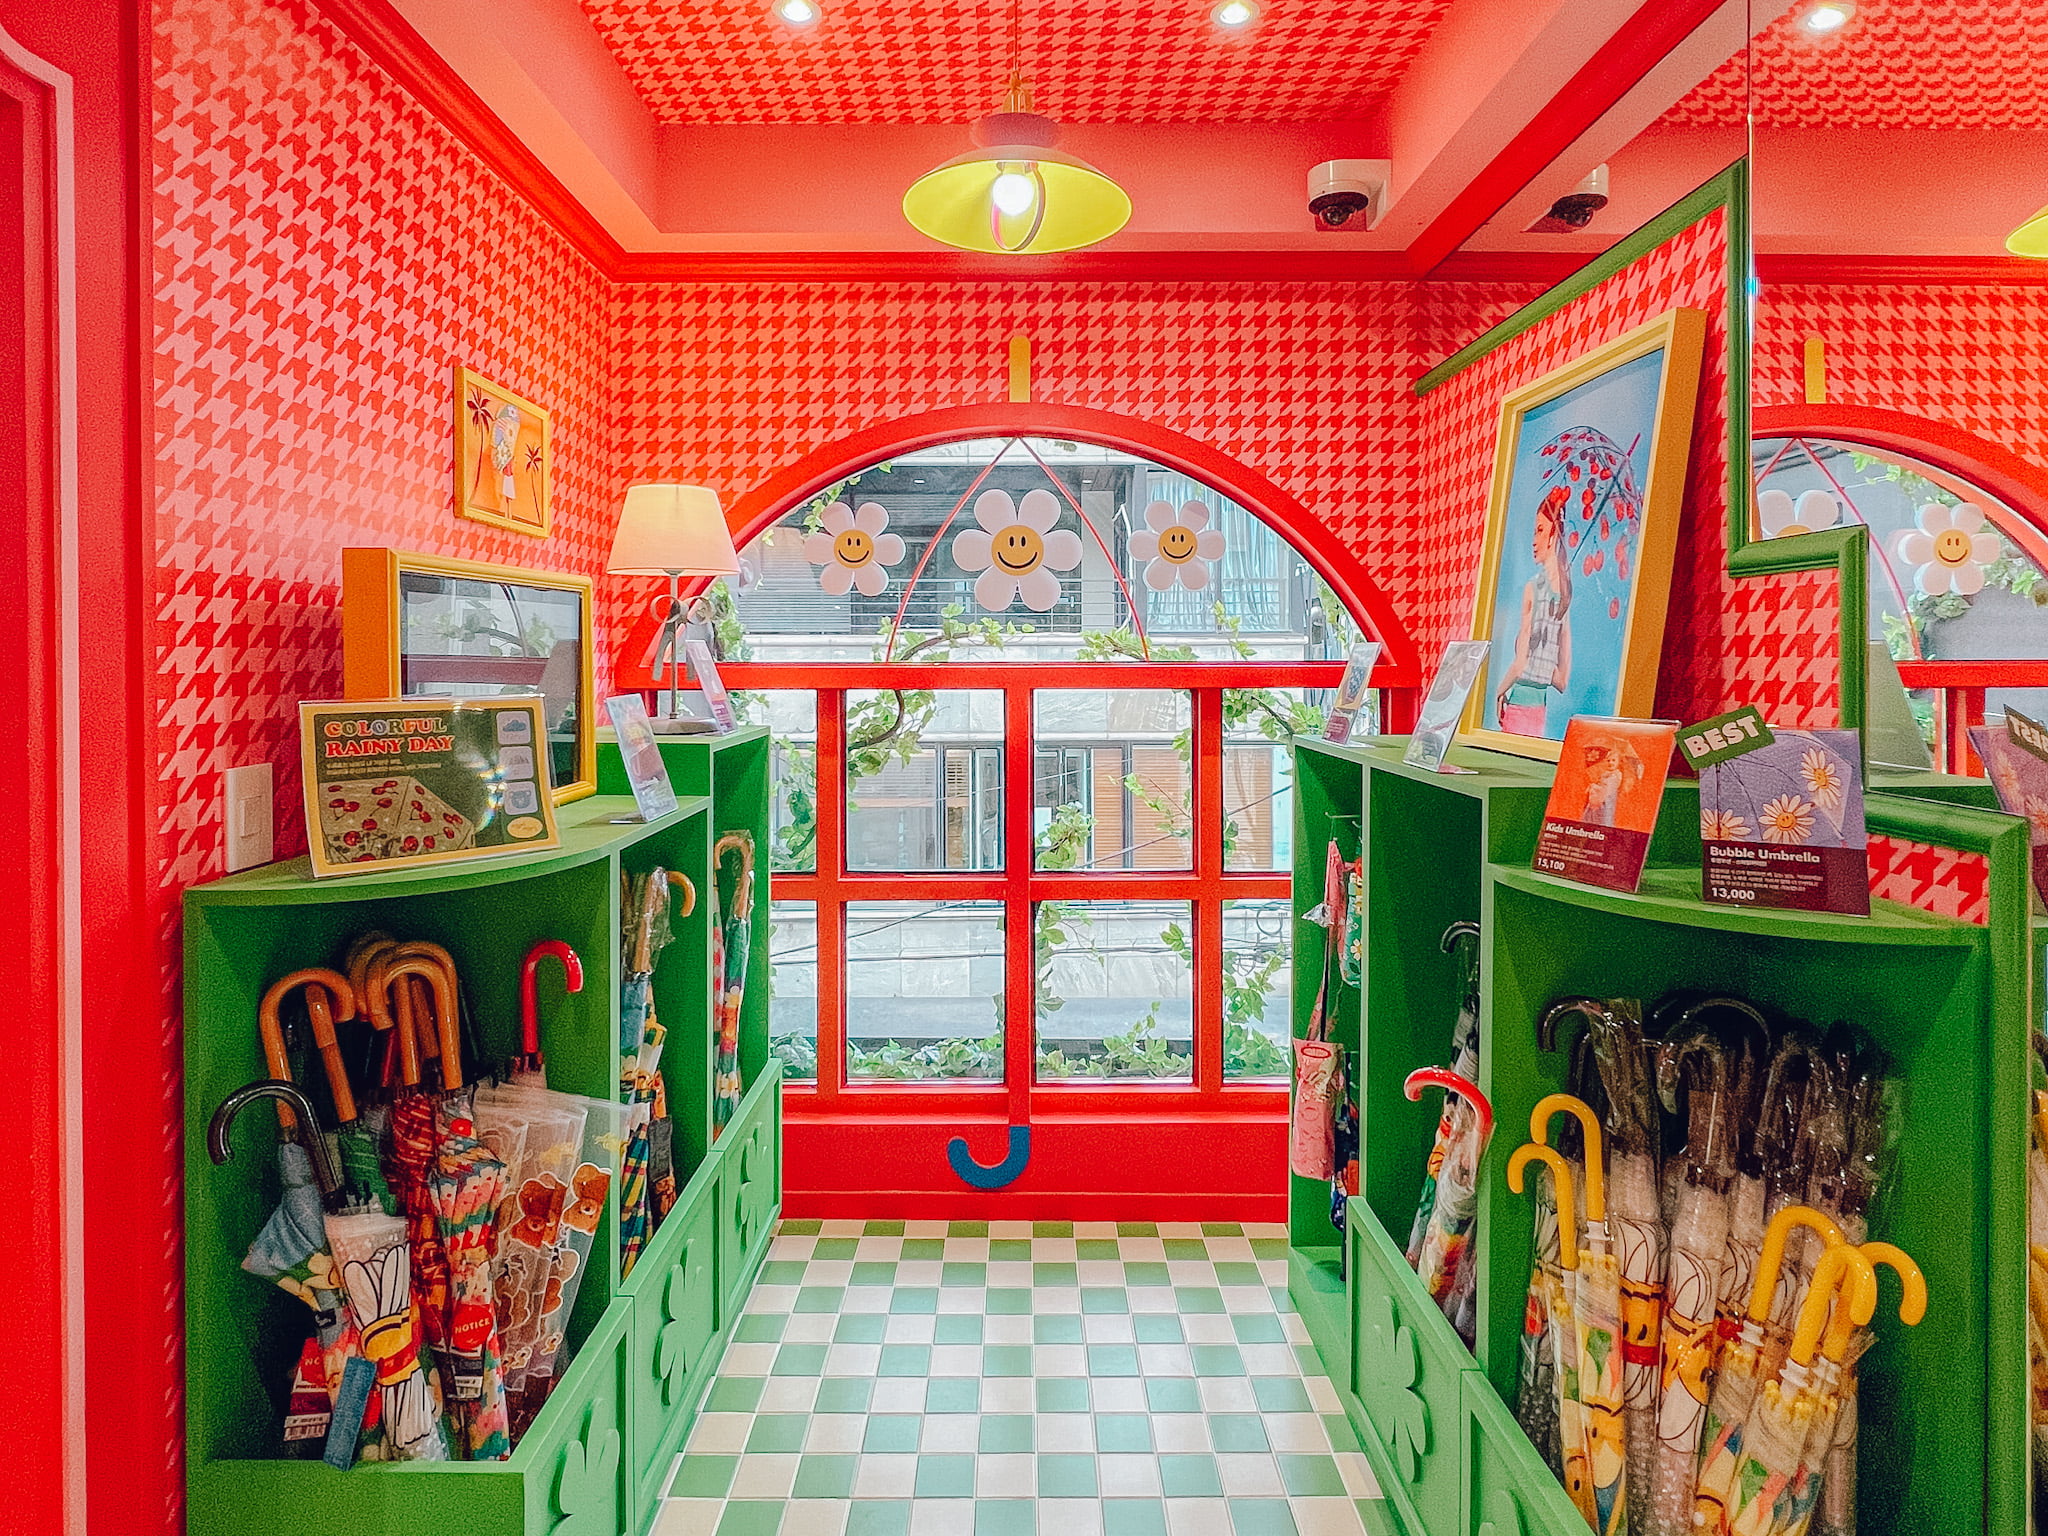 Wiggle Wiggle Zip: A Colorful and Whimsical Shopping Experience in Seoul